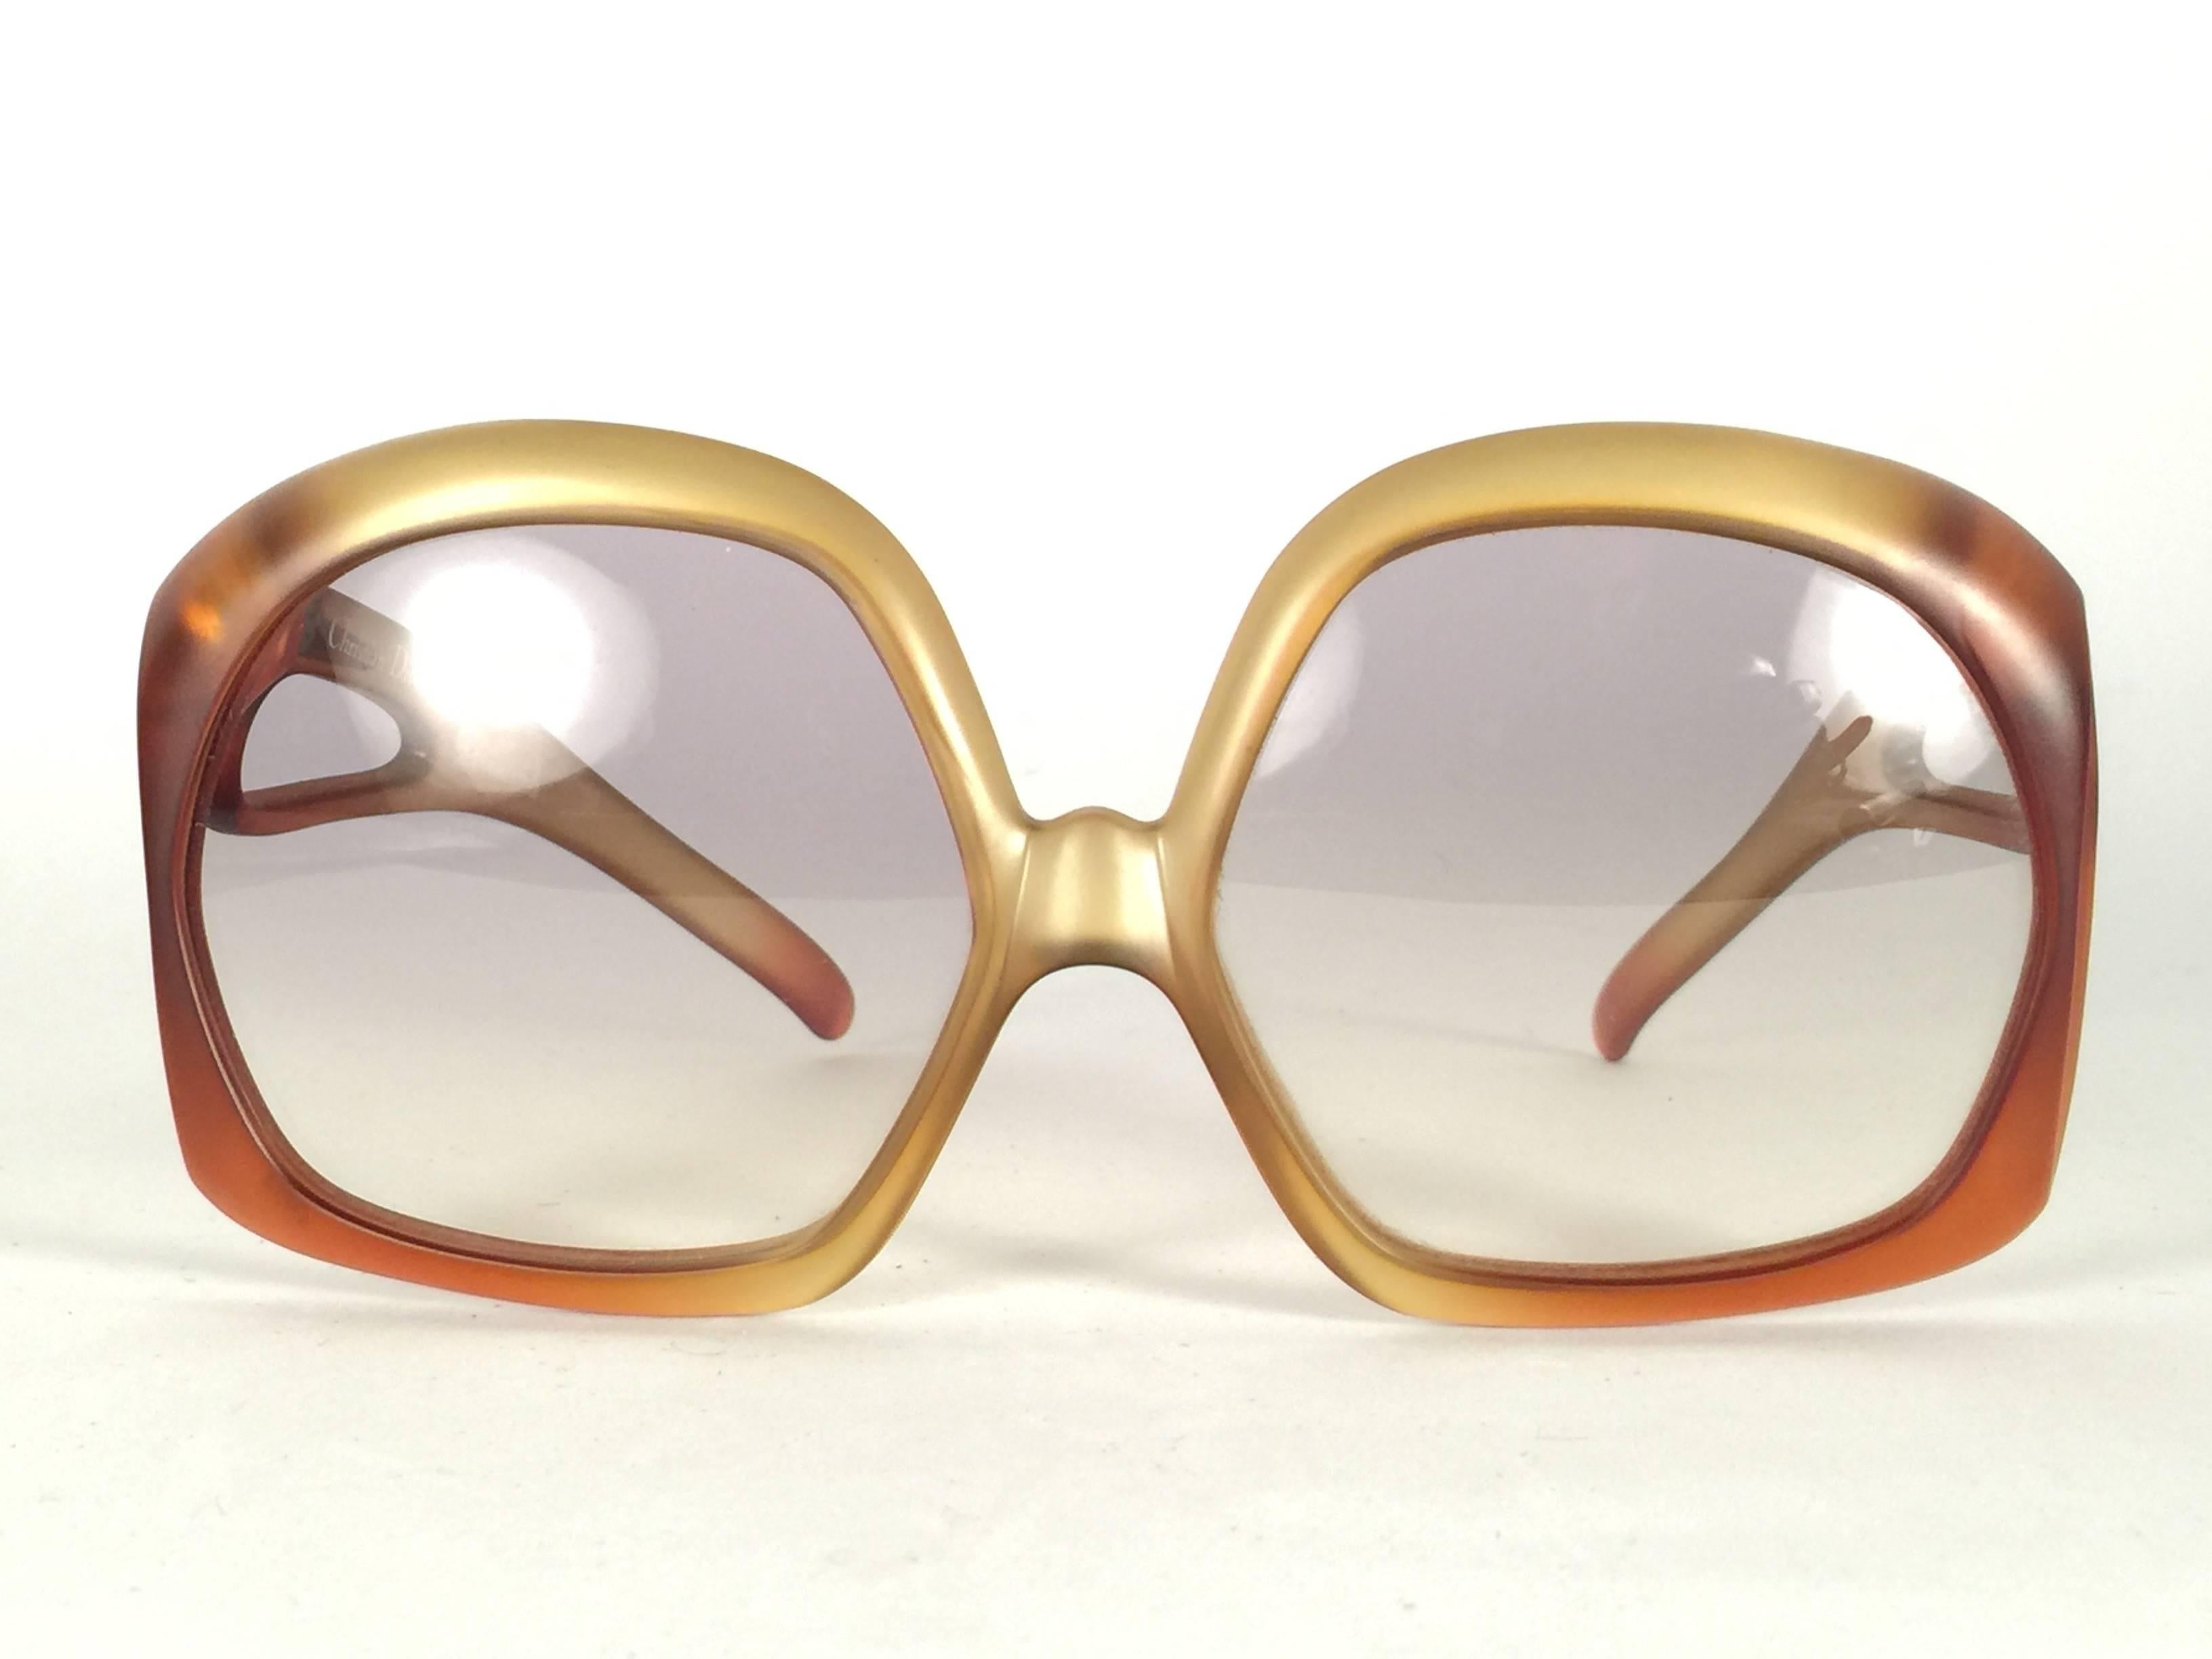 New Vintage Christian Dior 2005 Matte amber ombre frame sporting spotless lenses. 

Made in Germany.
 
Produced and design in 1970's.

New, never worn or displayed. Comes with its original silver Christian Dior Lunettes sleeve.